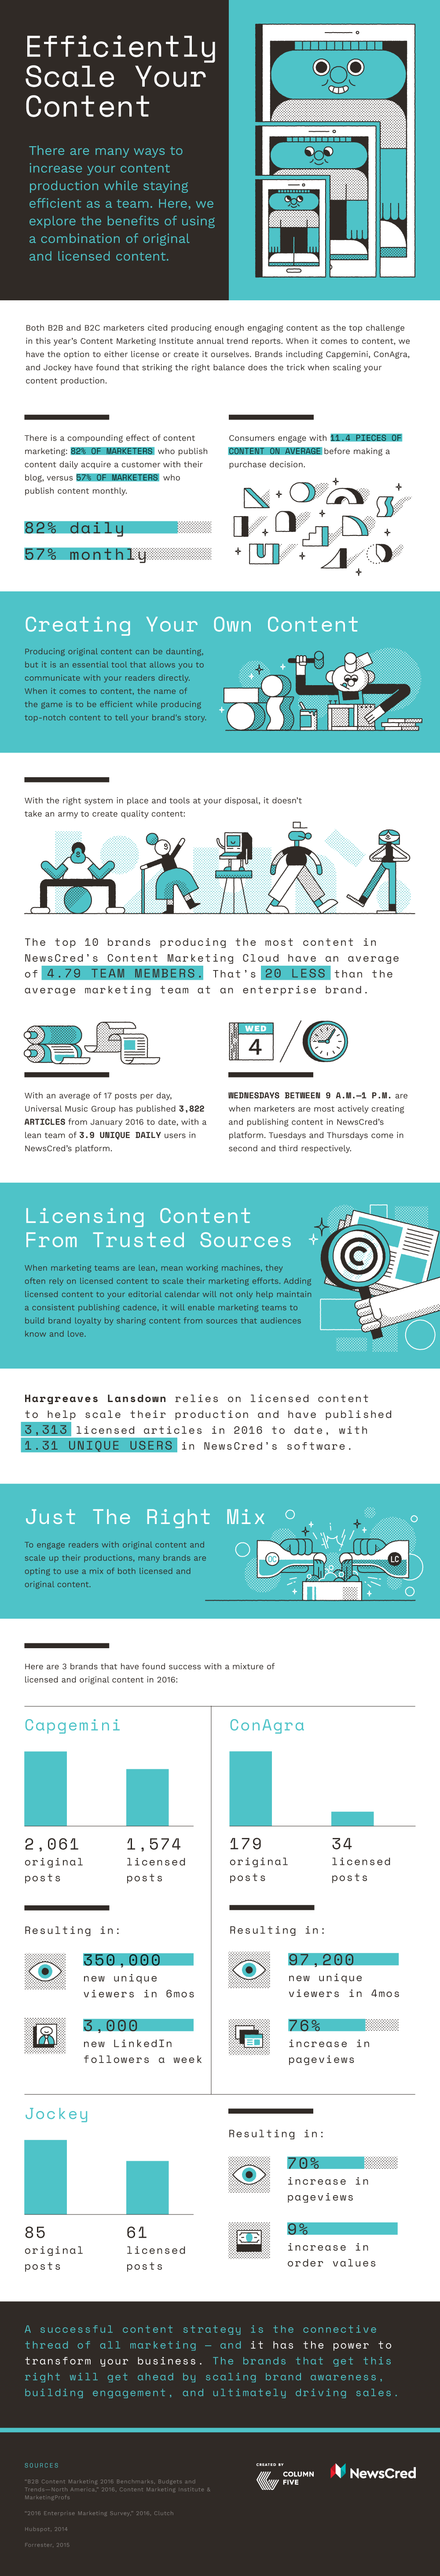 How to Efficiently Scale Your Content - #infographic